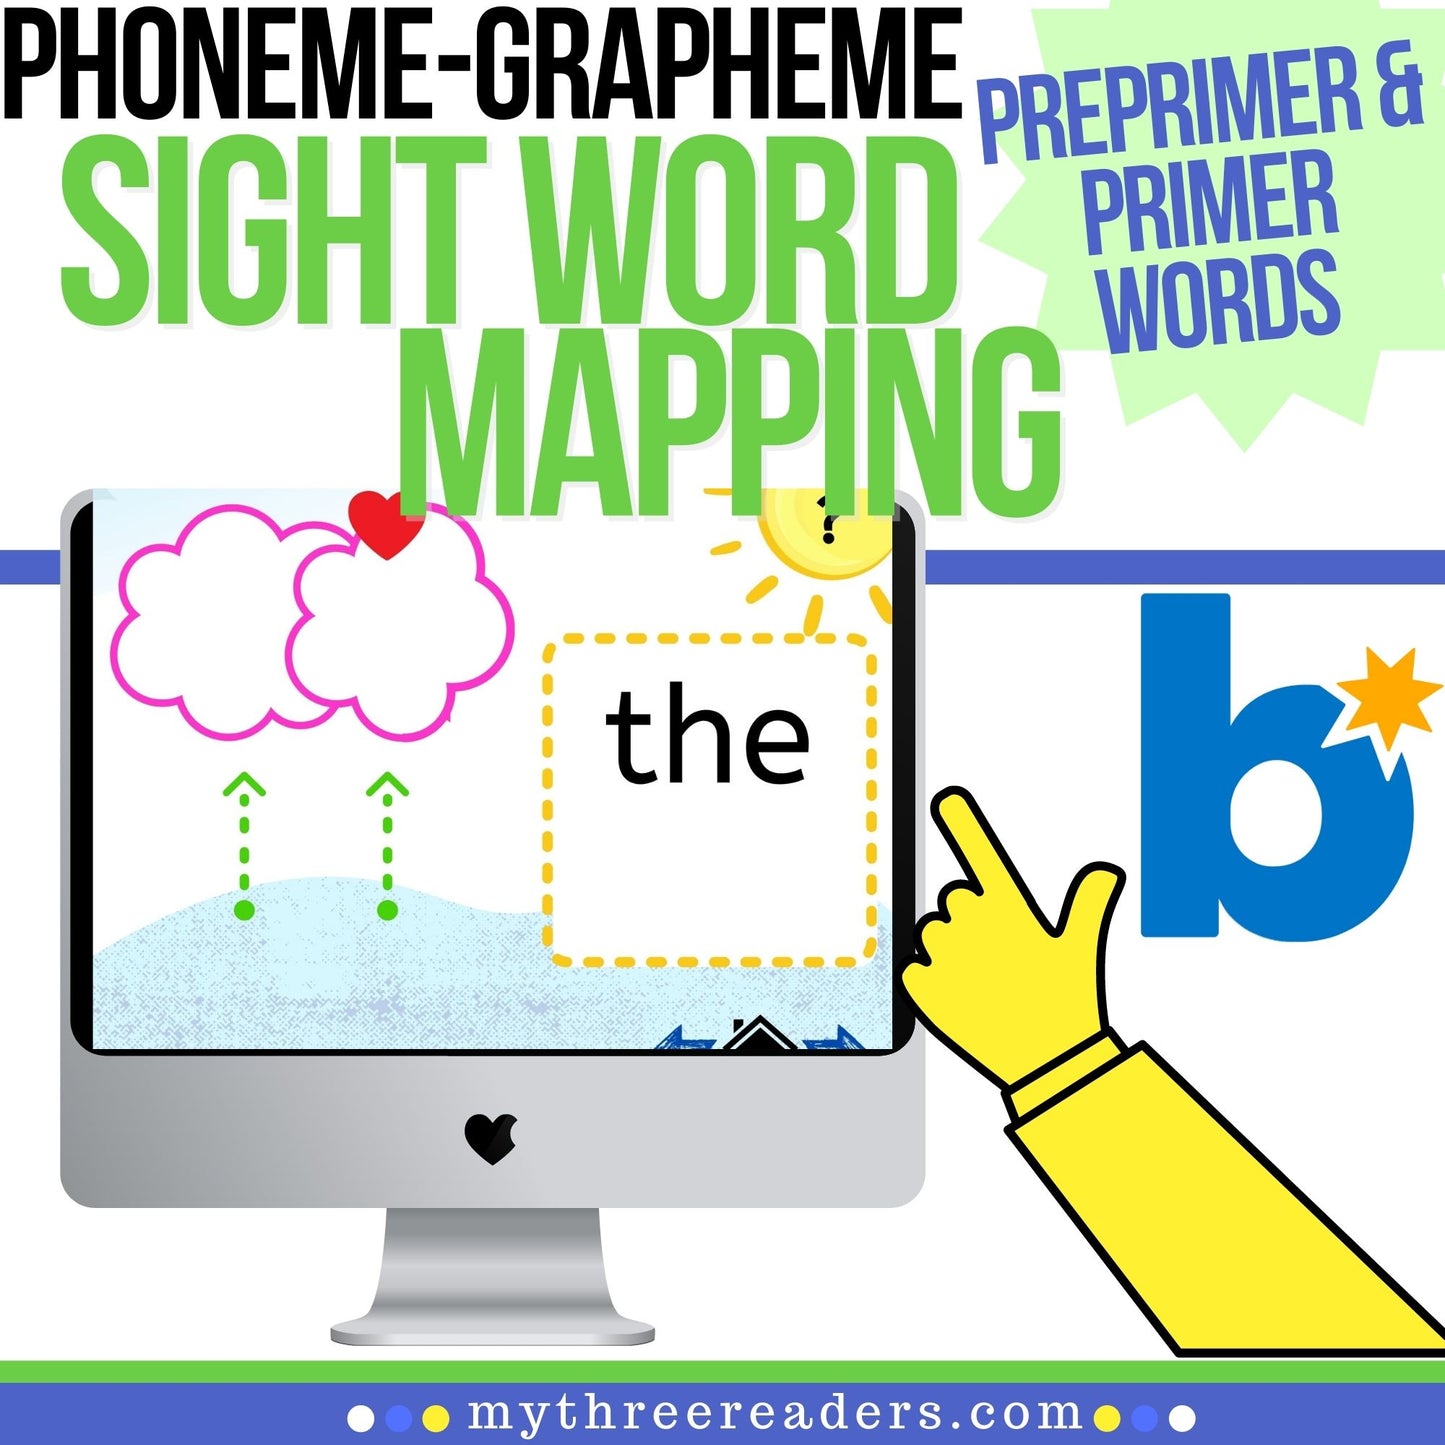 Mapping the High Frequency Words Preprimer & Primer